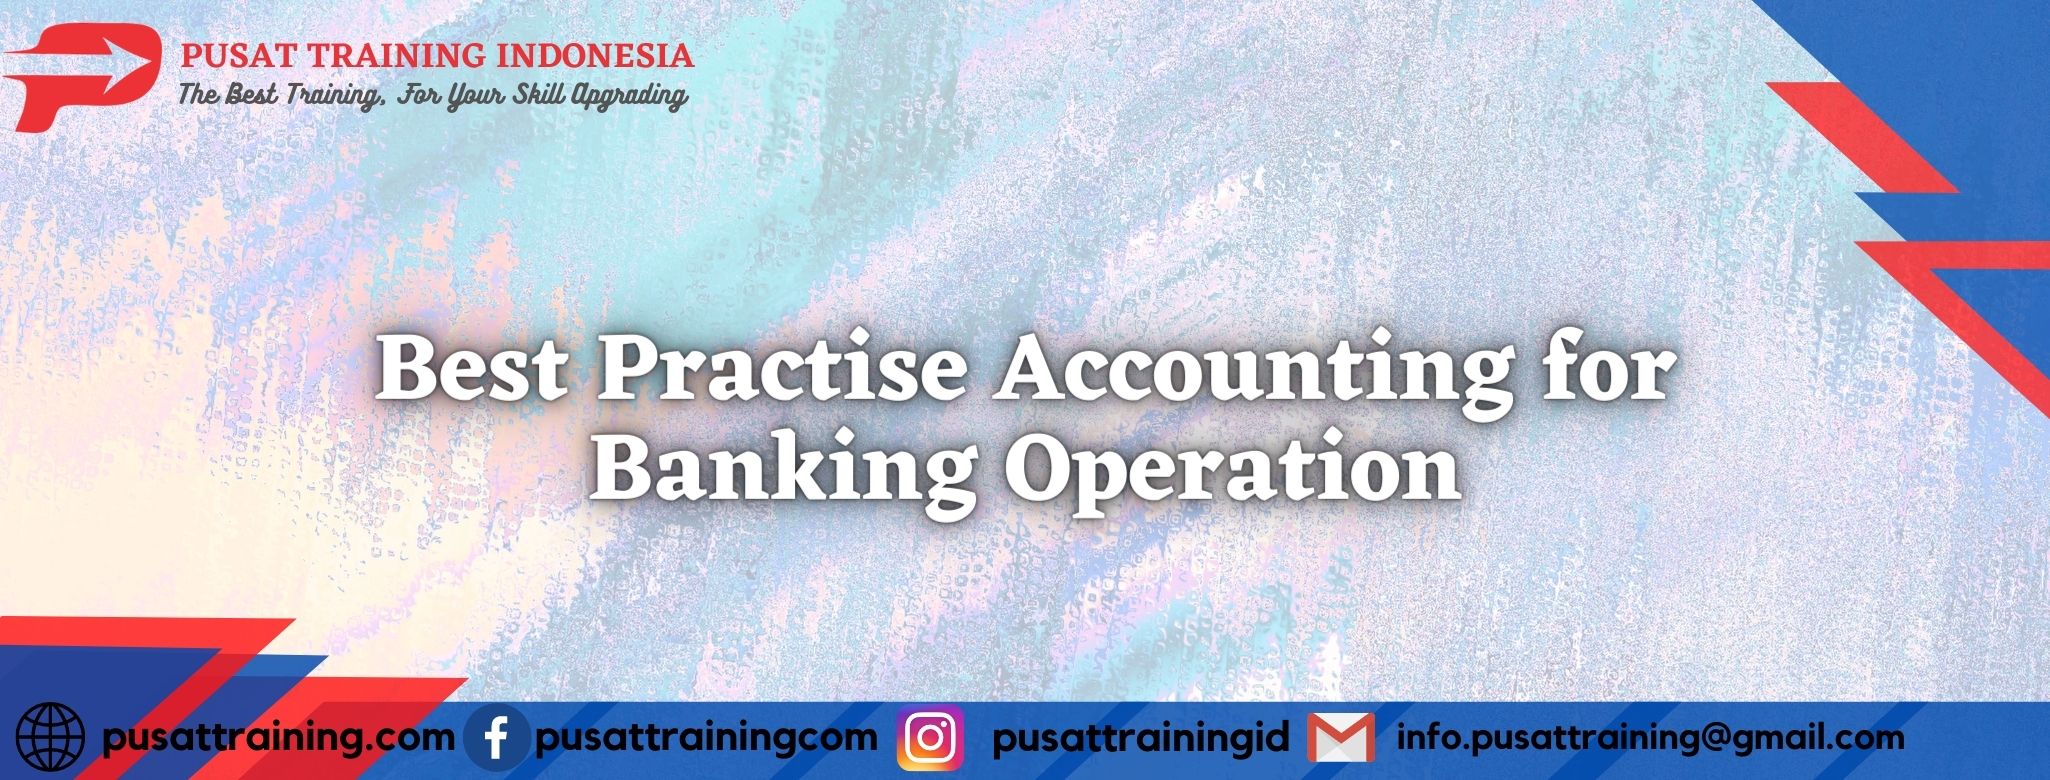 Best-Practise-Accounting-for-Banking-Operation